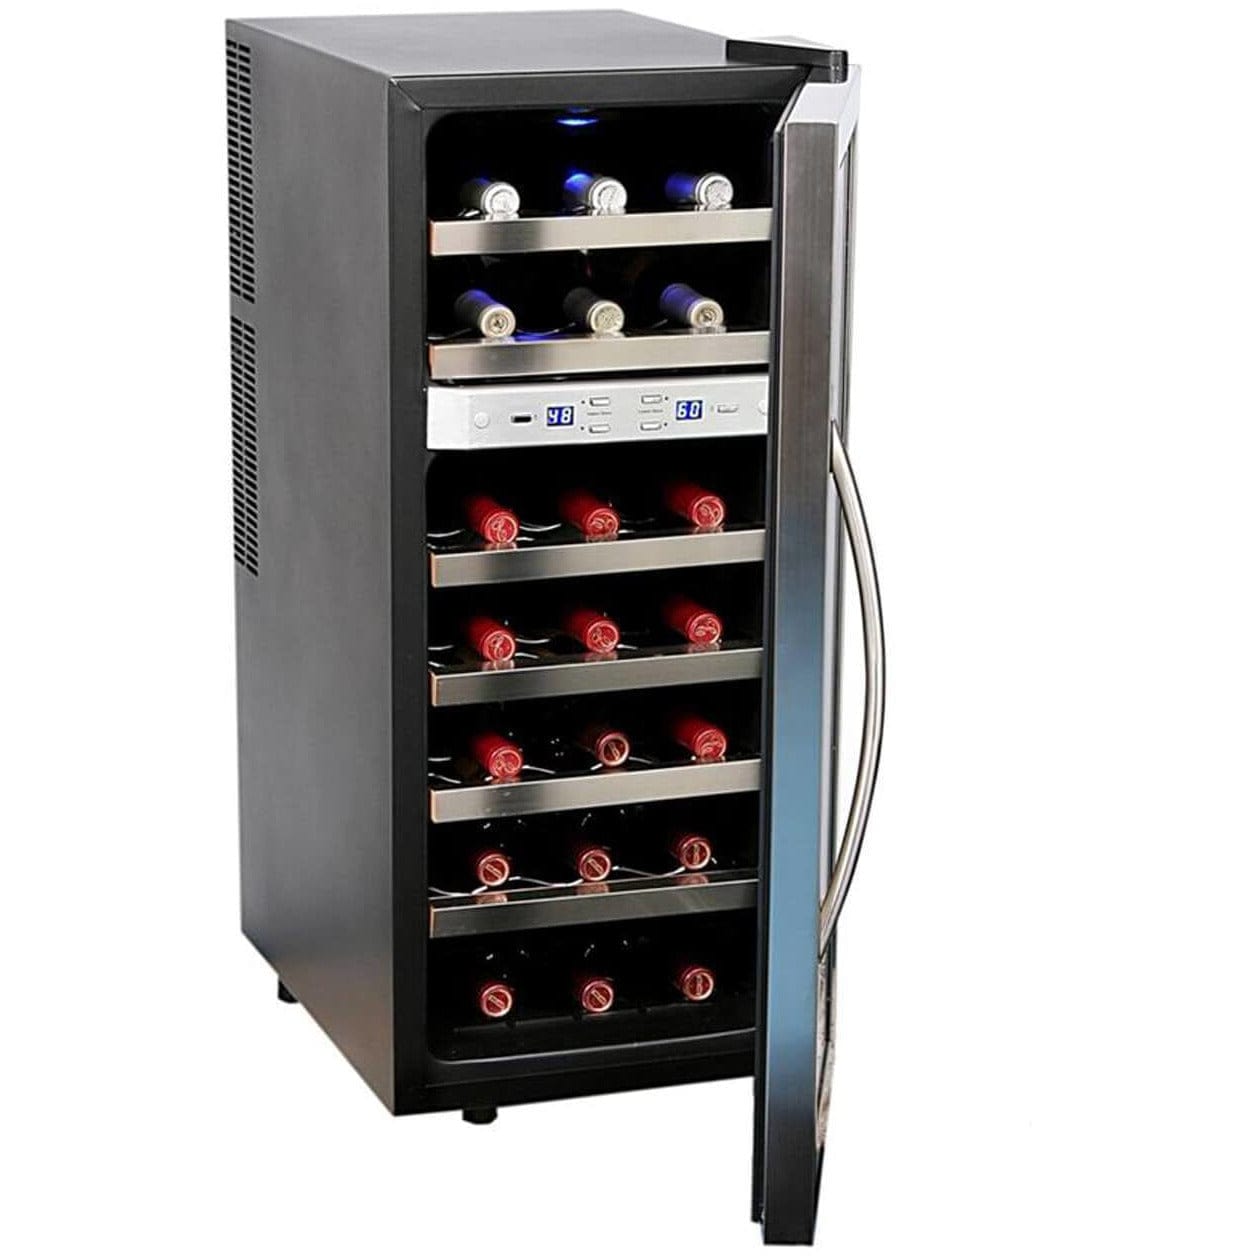 Whynter 21 Bottle Dual Temperature Zone Wine Cooler WC-211DZ Wine Coolers Empire